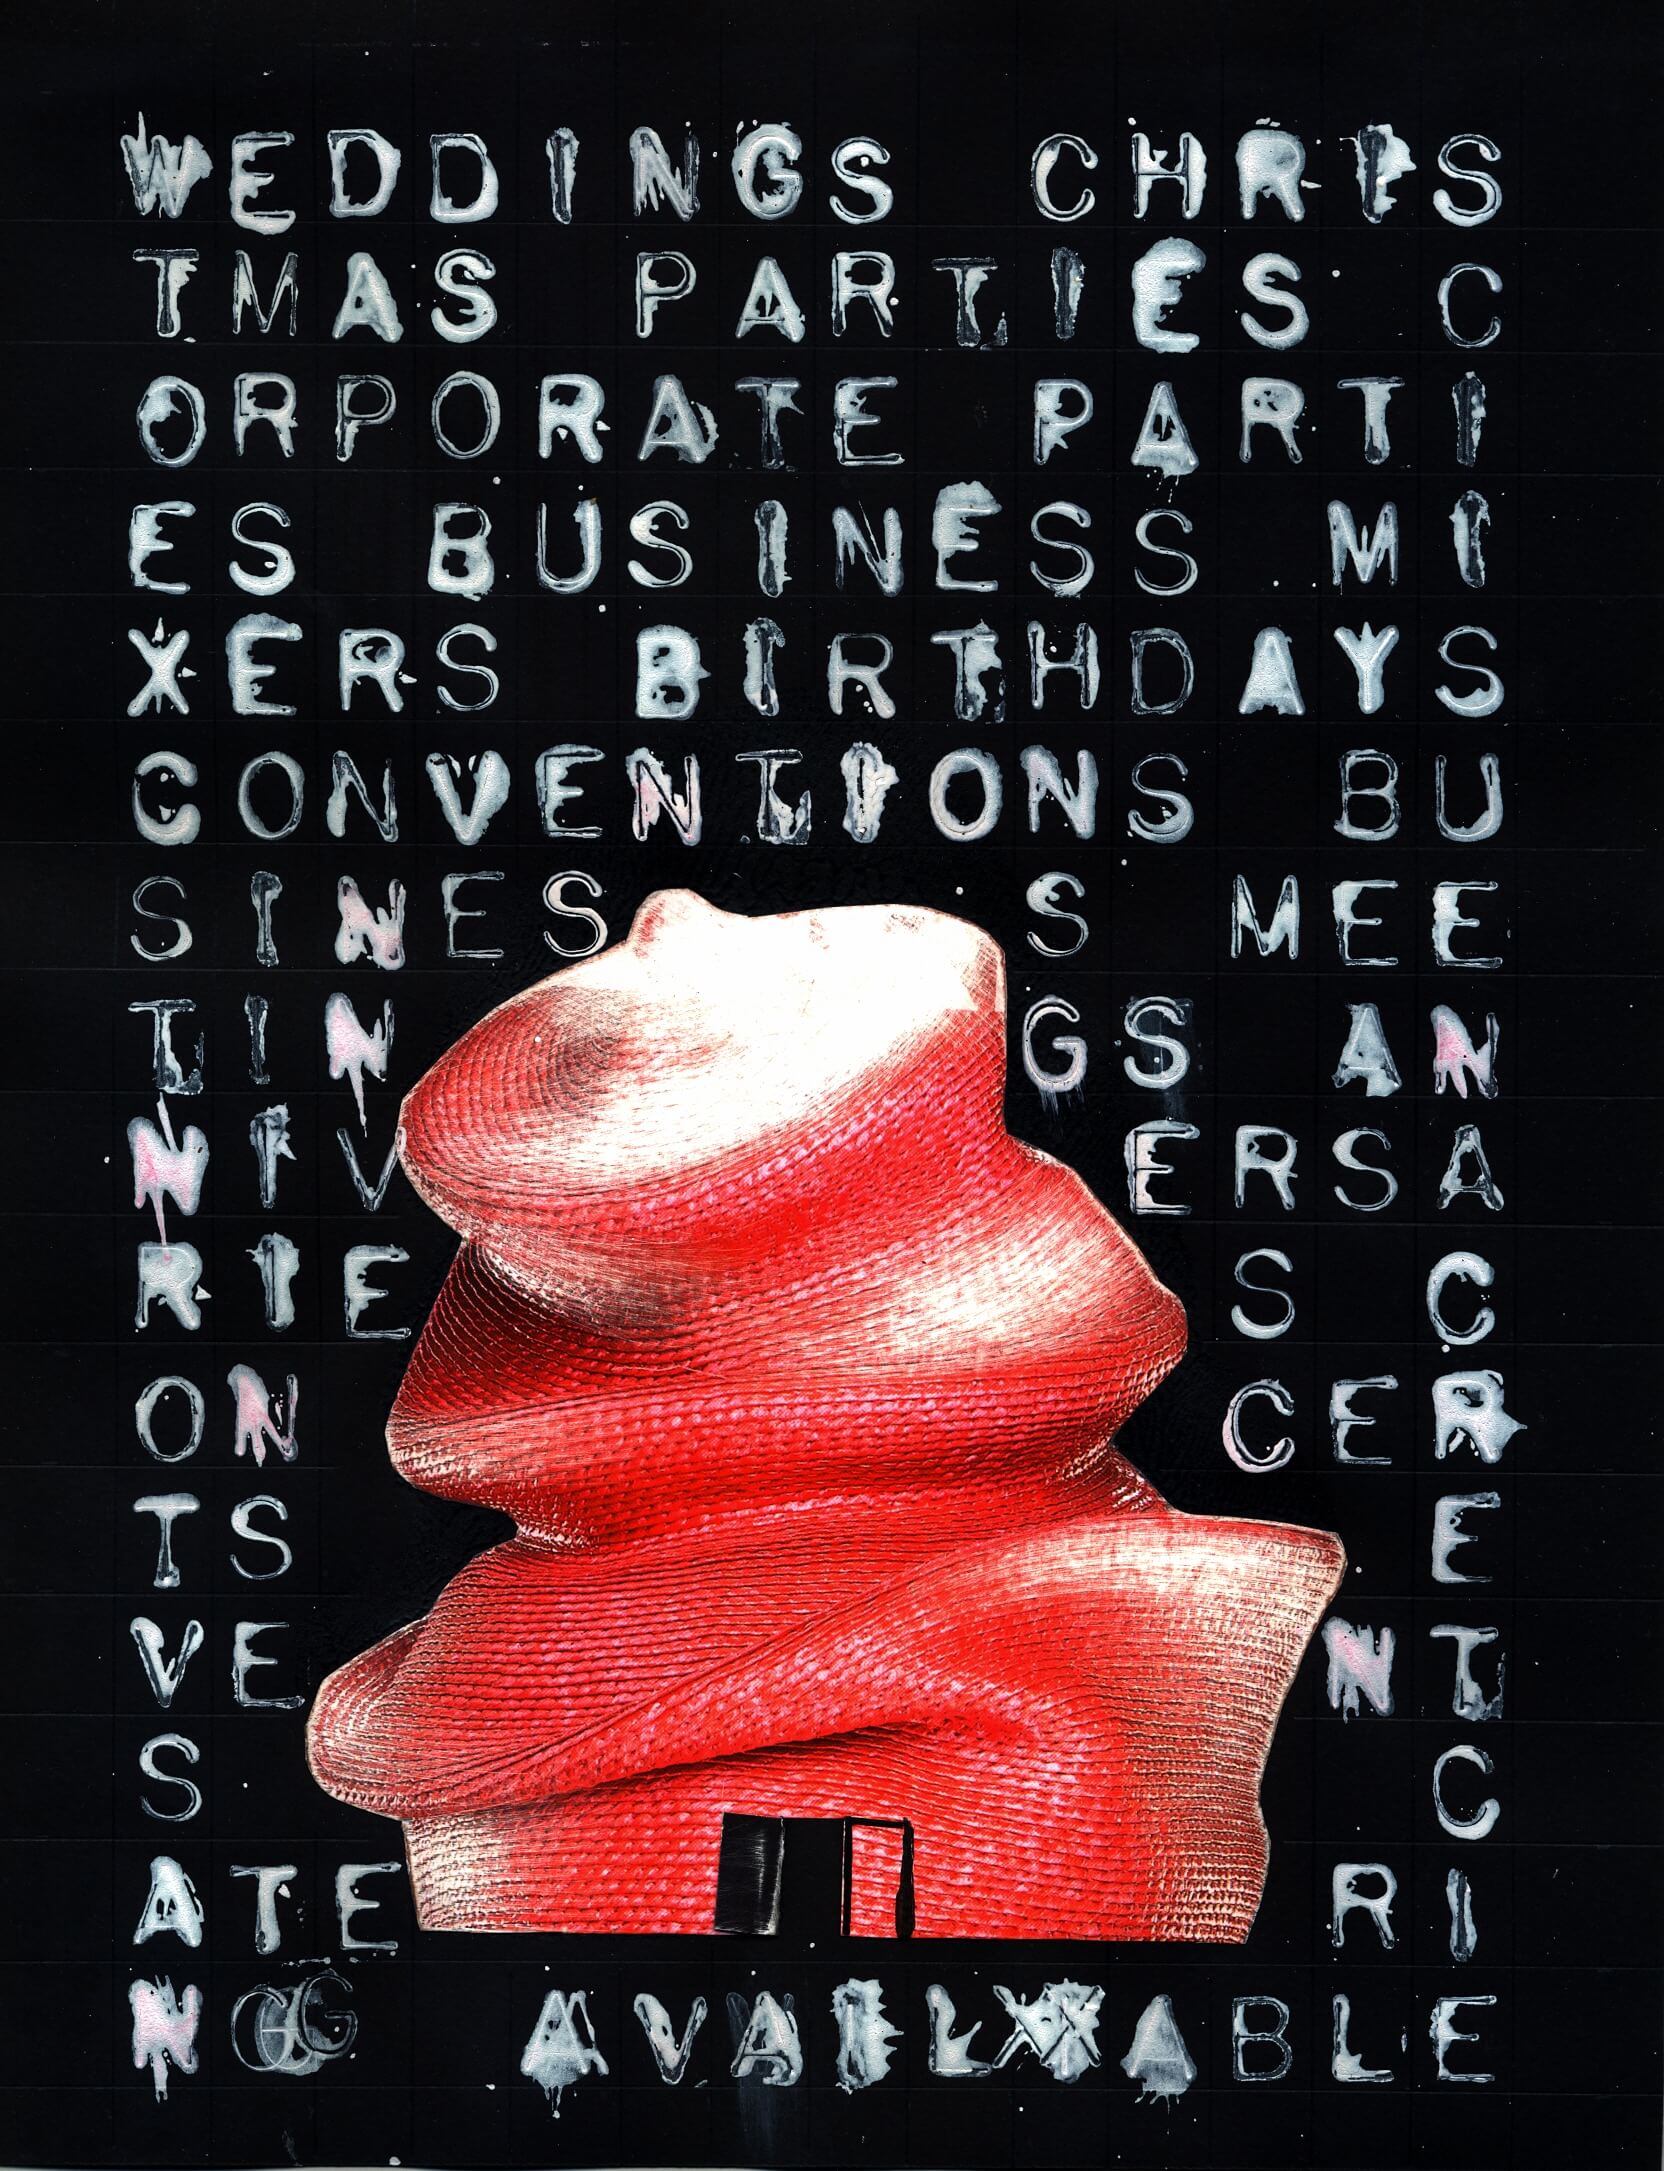 a red figure shaped like a stack of pancakes or a bendy hat, covered in fabric texture, with a black door drawn in the bottom. There is a wall of white typewriter text filling the black background, that reads "Weddings, Christmas parties, Corporate parties, business mixers, birthdays, conventions, business meetings, anniversaries, concerts, events, catering available."